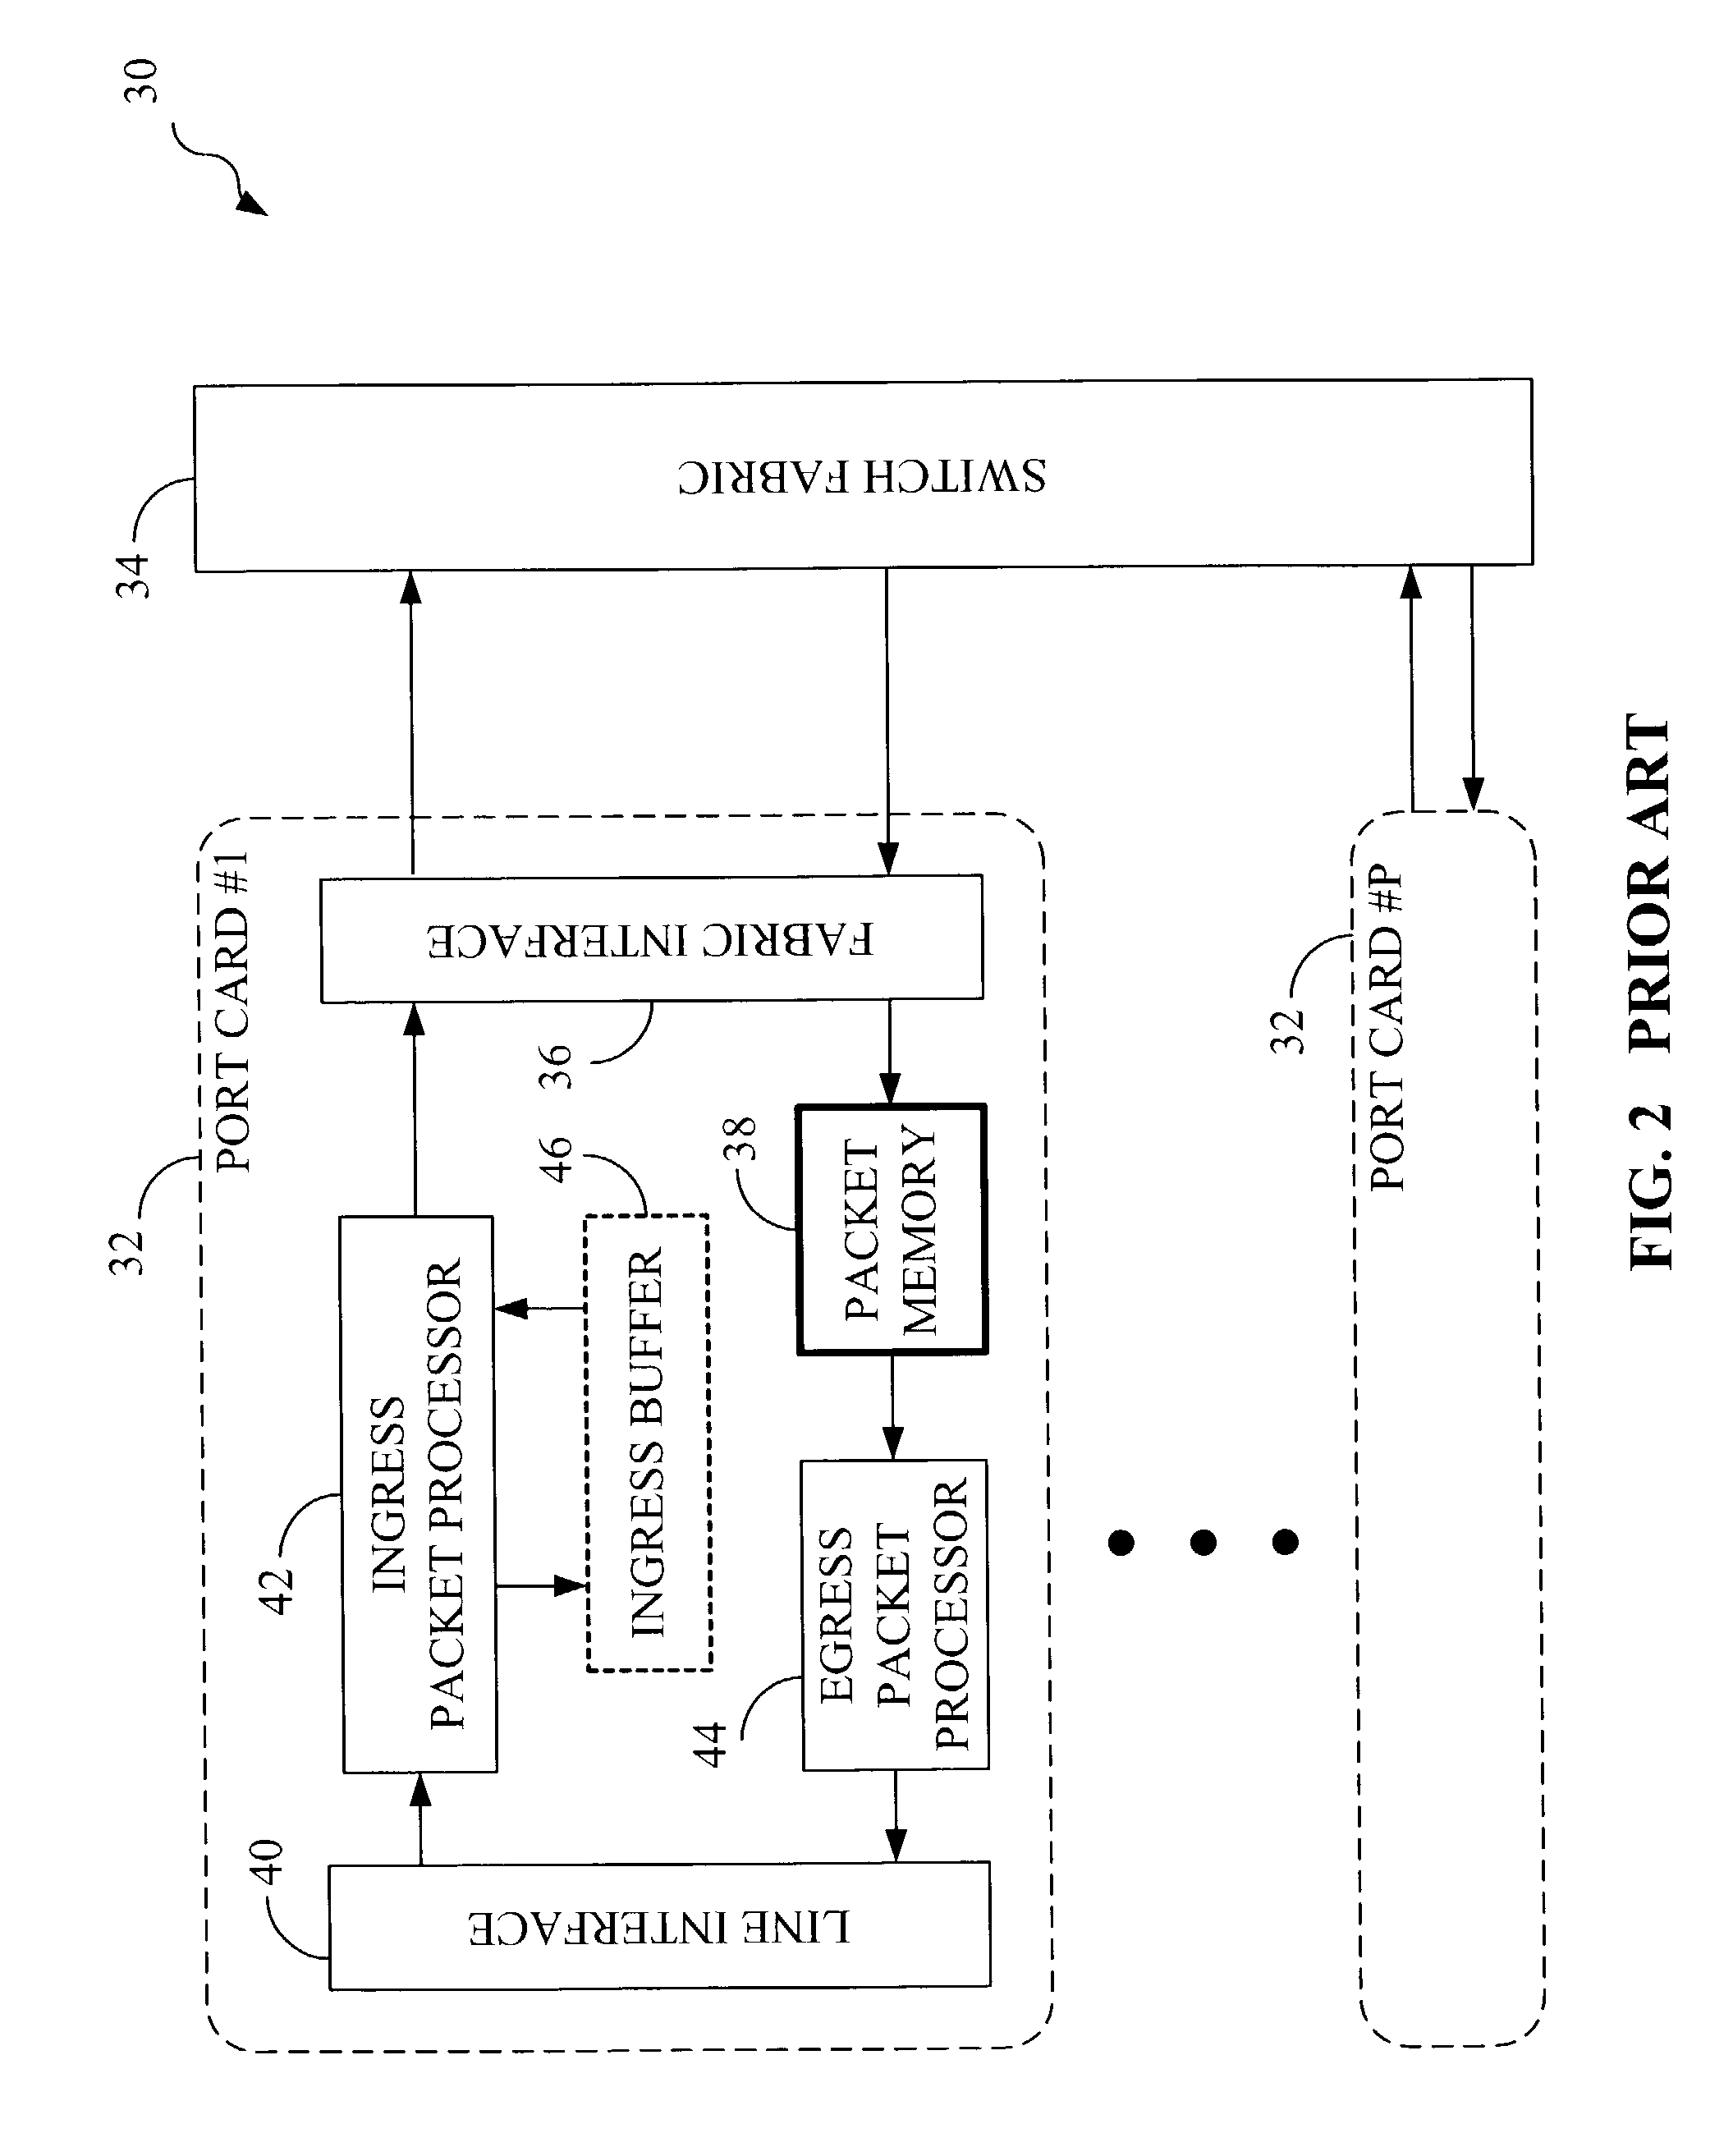 High-speed memory having a modular structure